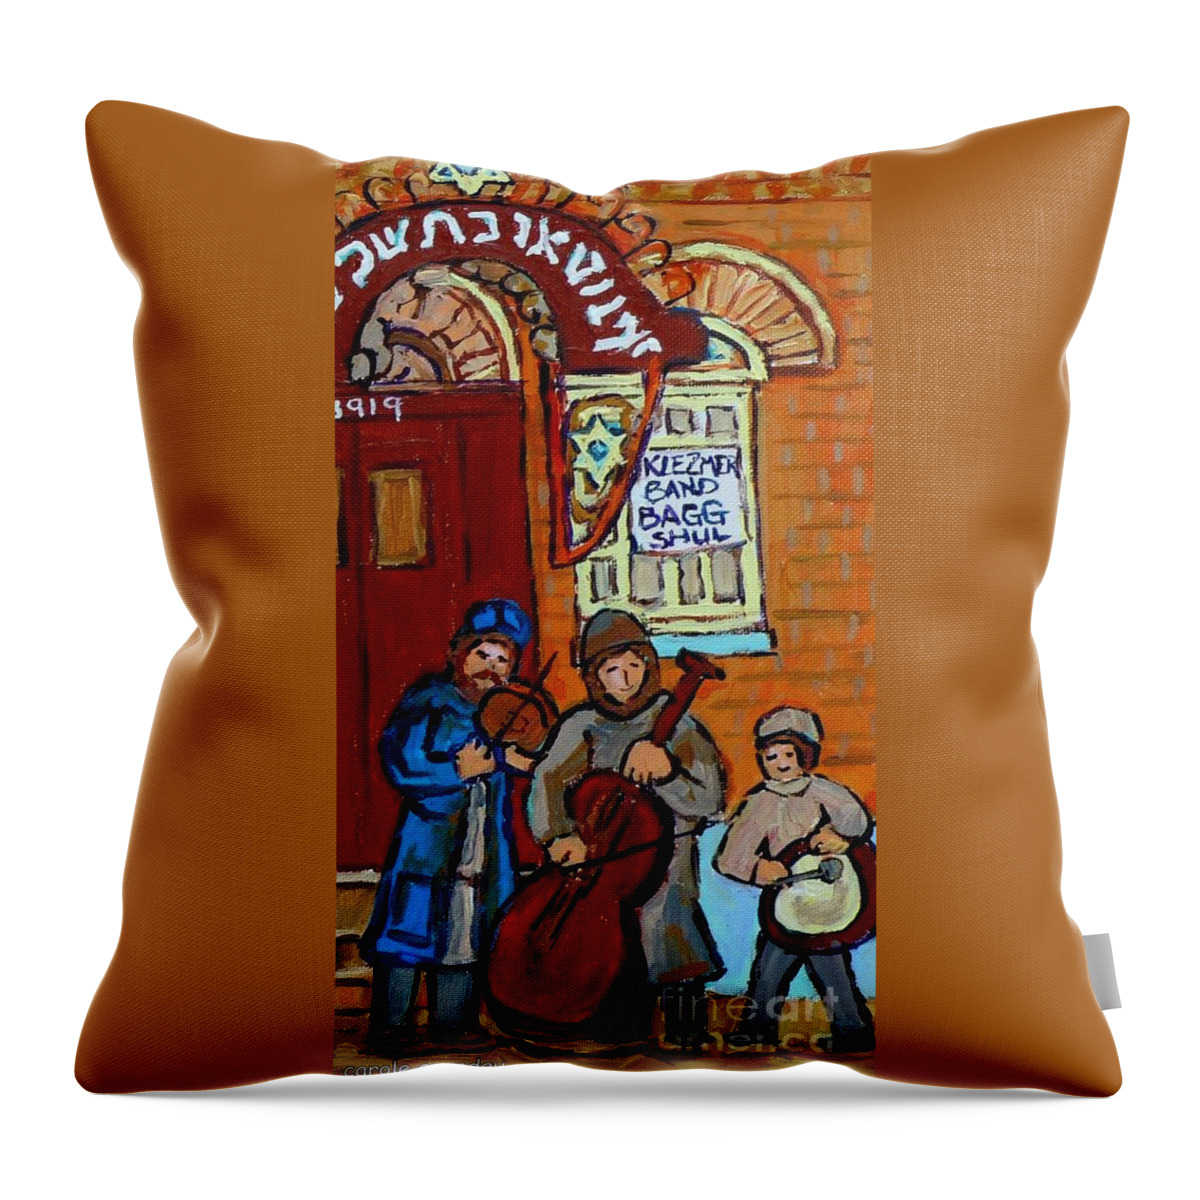 Montreal Throw Pillow featuring the painting Klezmer Band Live Performance At Bagg Synagogue Montreal Street Scene Jewish Art Carole Spandau   by Carole Spandau